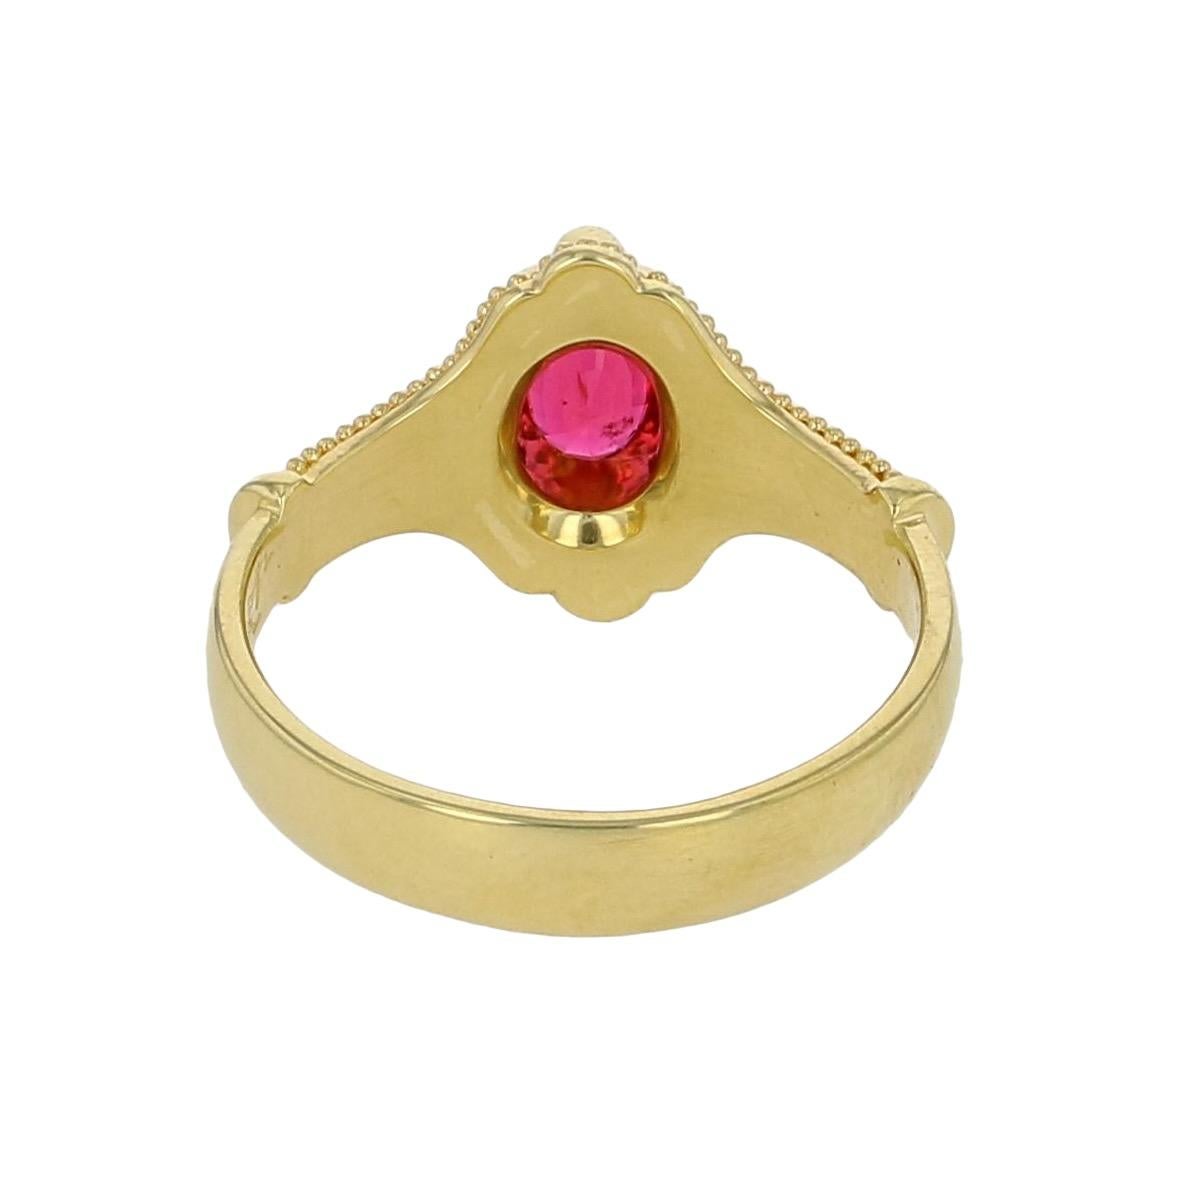 Kent Raible 18 Karat Gold Red Spinel Solitaire Ring with Fine Granulation In New Condition For Sale In Mossrock, WA